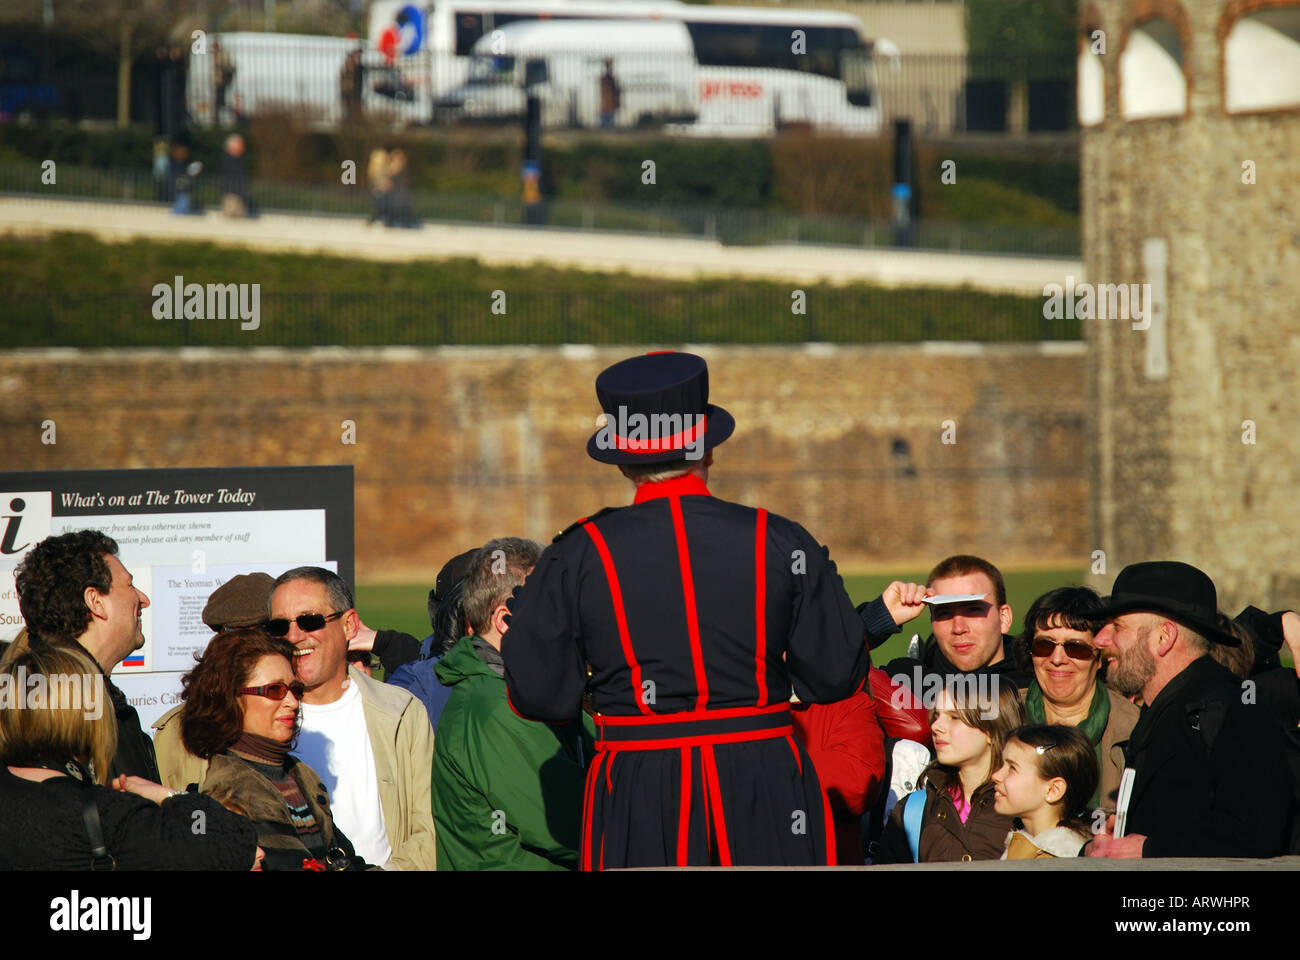 Beefeater (Yeomen Warder) Tour, Tower of London, Tower Hill, London Borough of Tower Hamlets, Greater London, England, United Kingdom Stock Photo